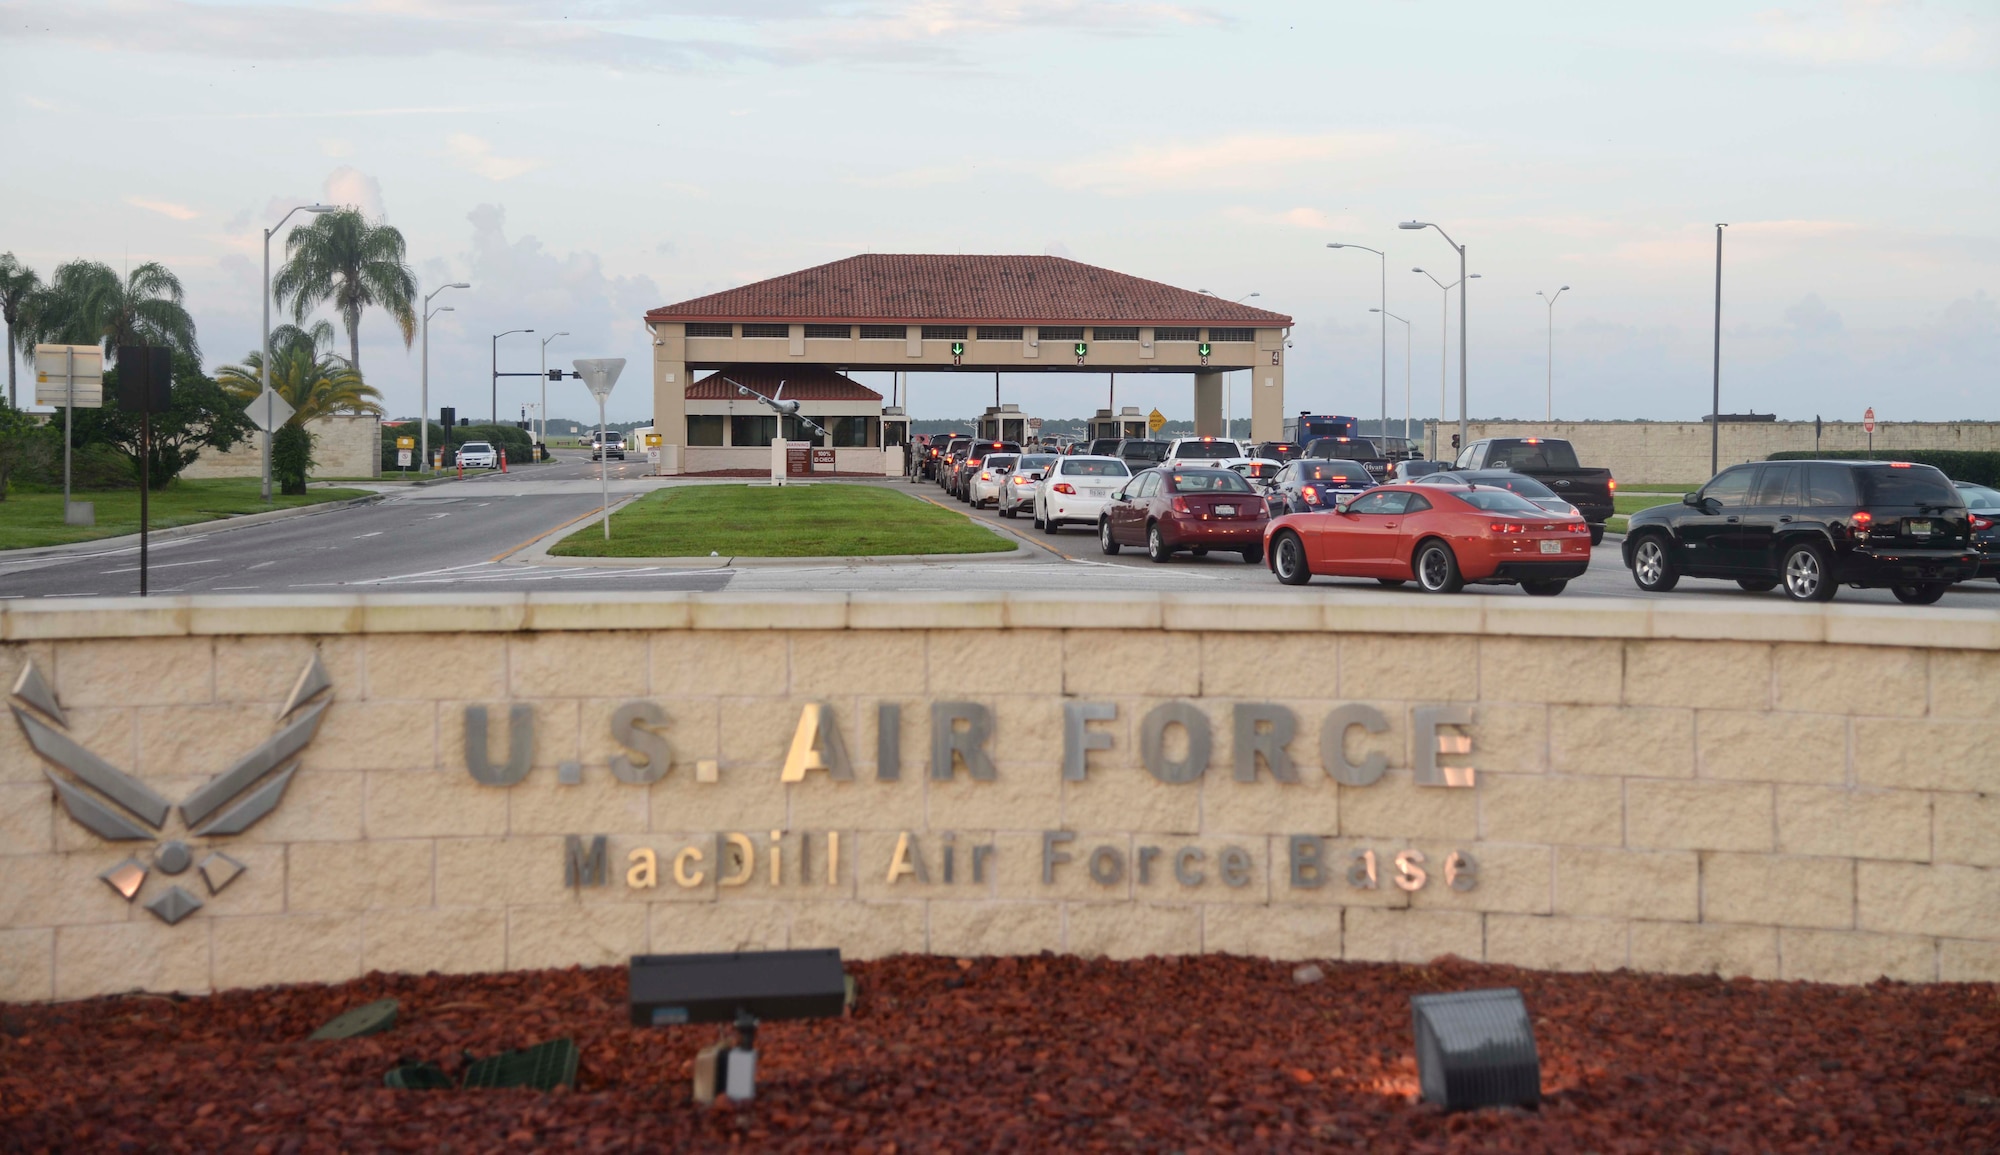 Privately owned vehicles wait to enter through the Dale Mabry gate at MacDill Air Force Base, Fla., Aug. 12, 2015. Gate Traffic has been a hot topic for MacDill AFB this year. (U.S. Air Force photo by Senior Airman Vernon L. Fowler Jr./Released)